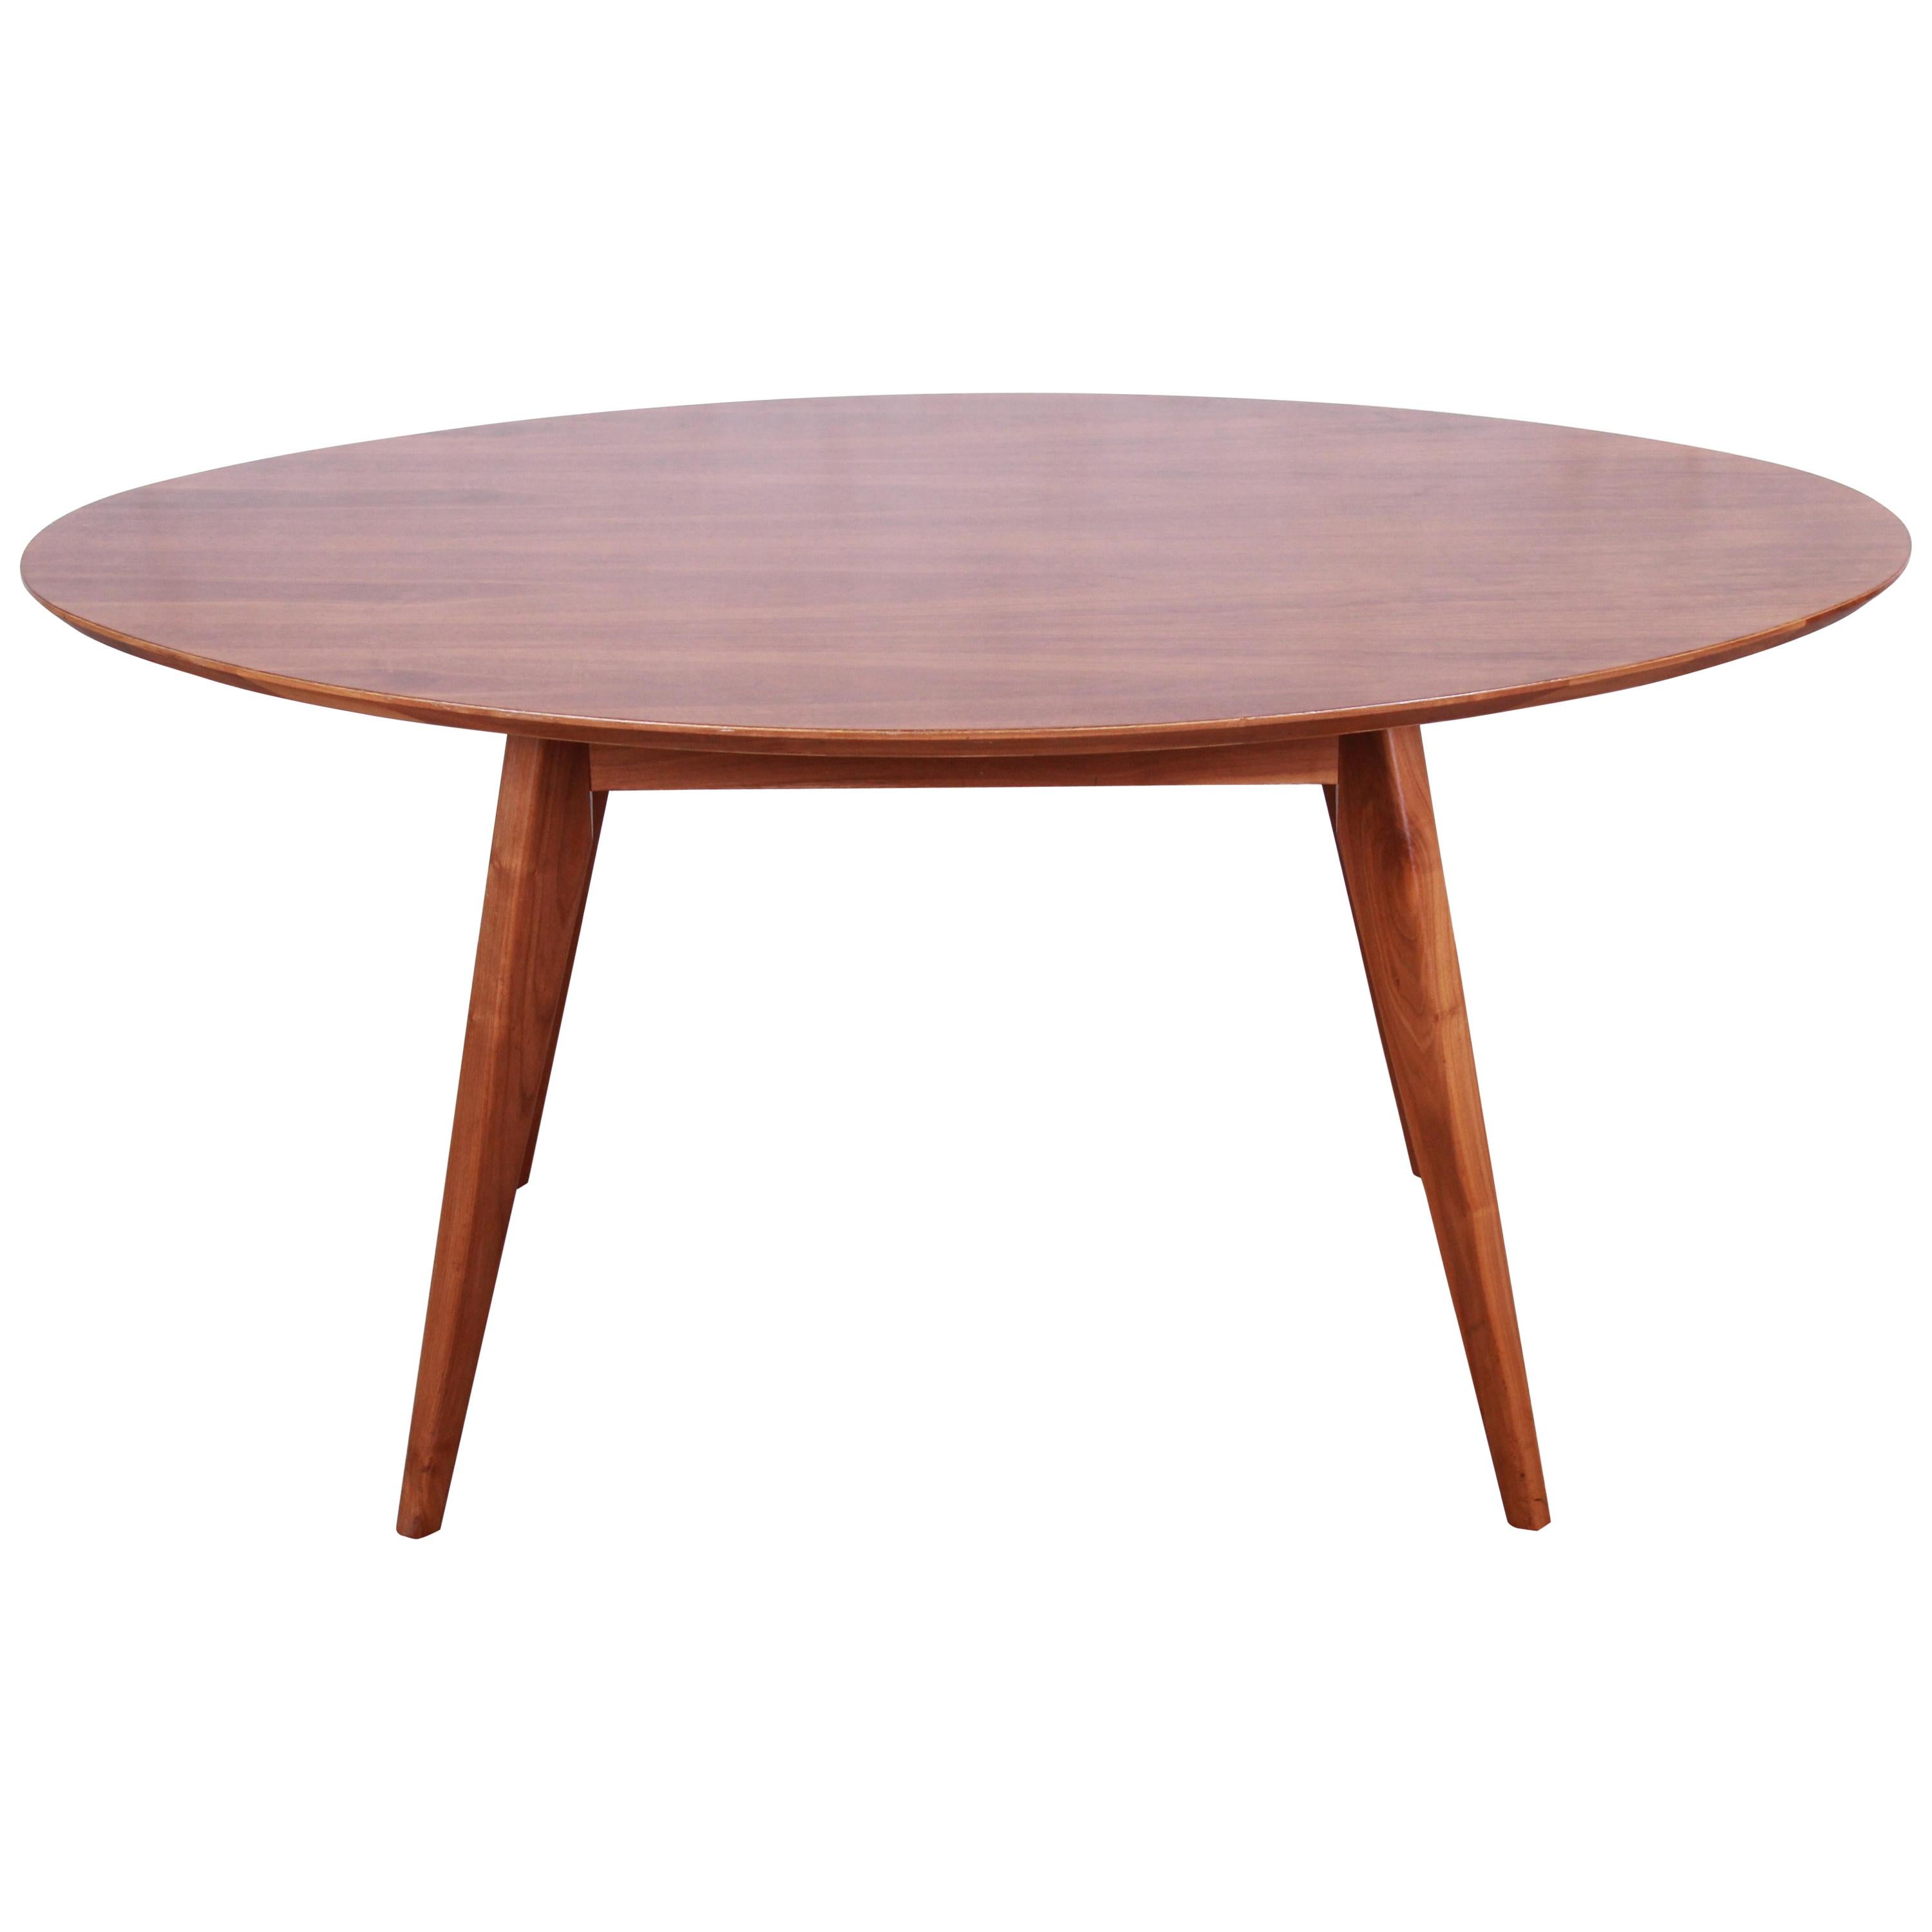 Jens Risom for Knoll Walnut Elliptical Dining or Game Table